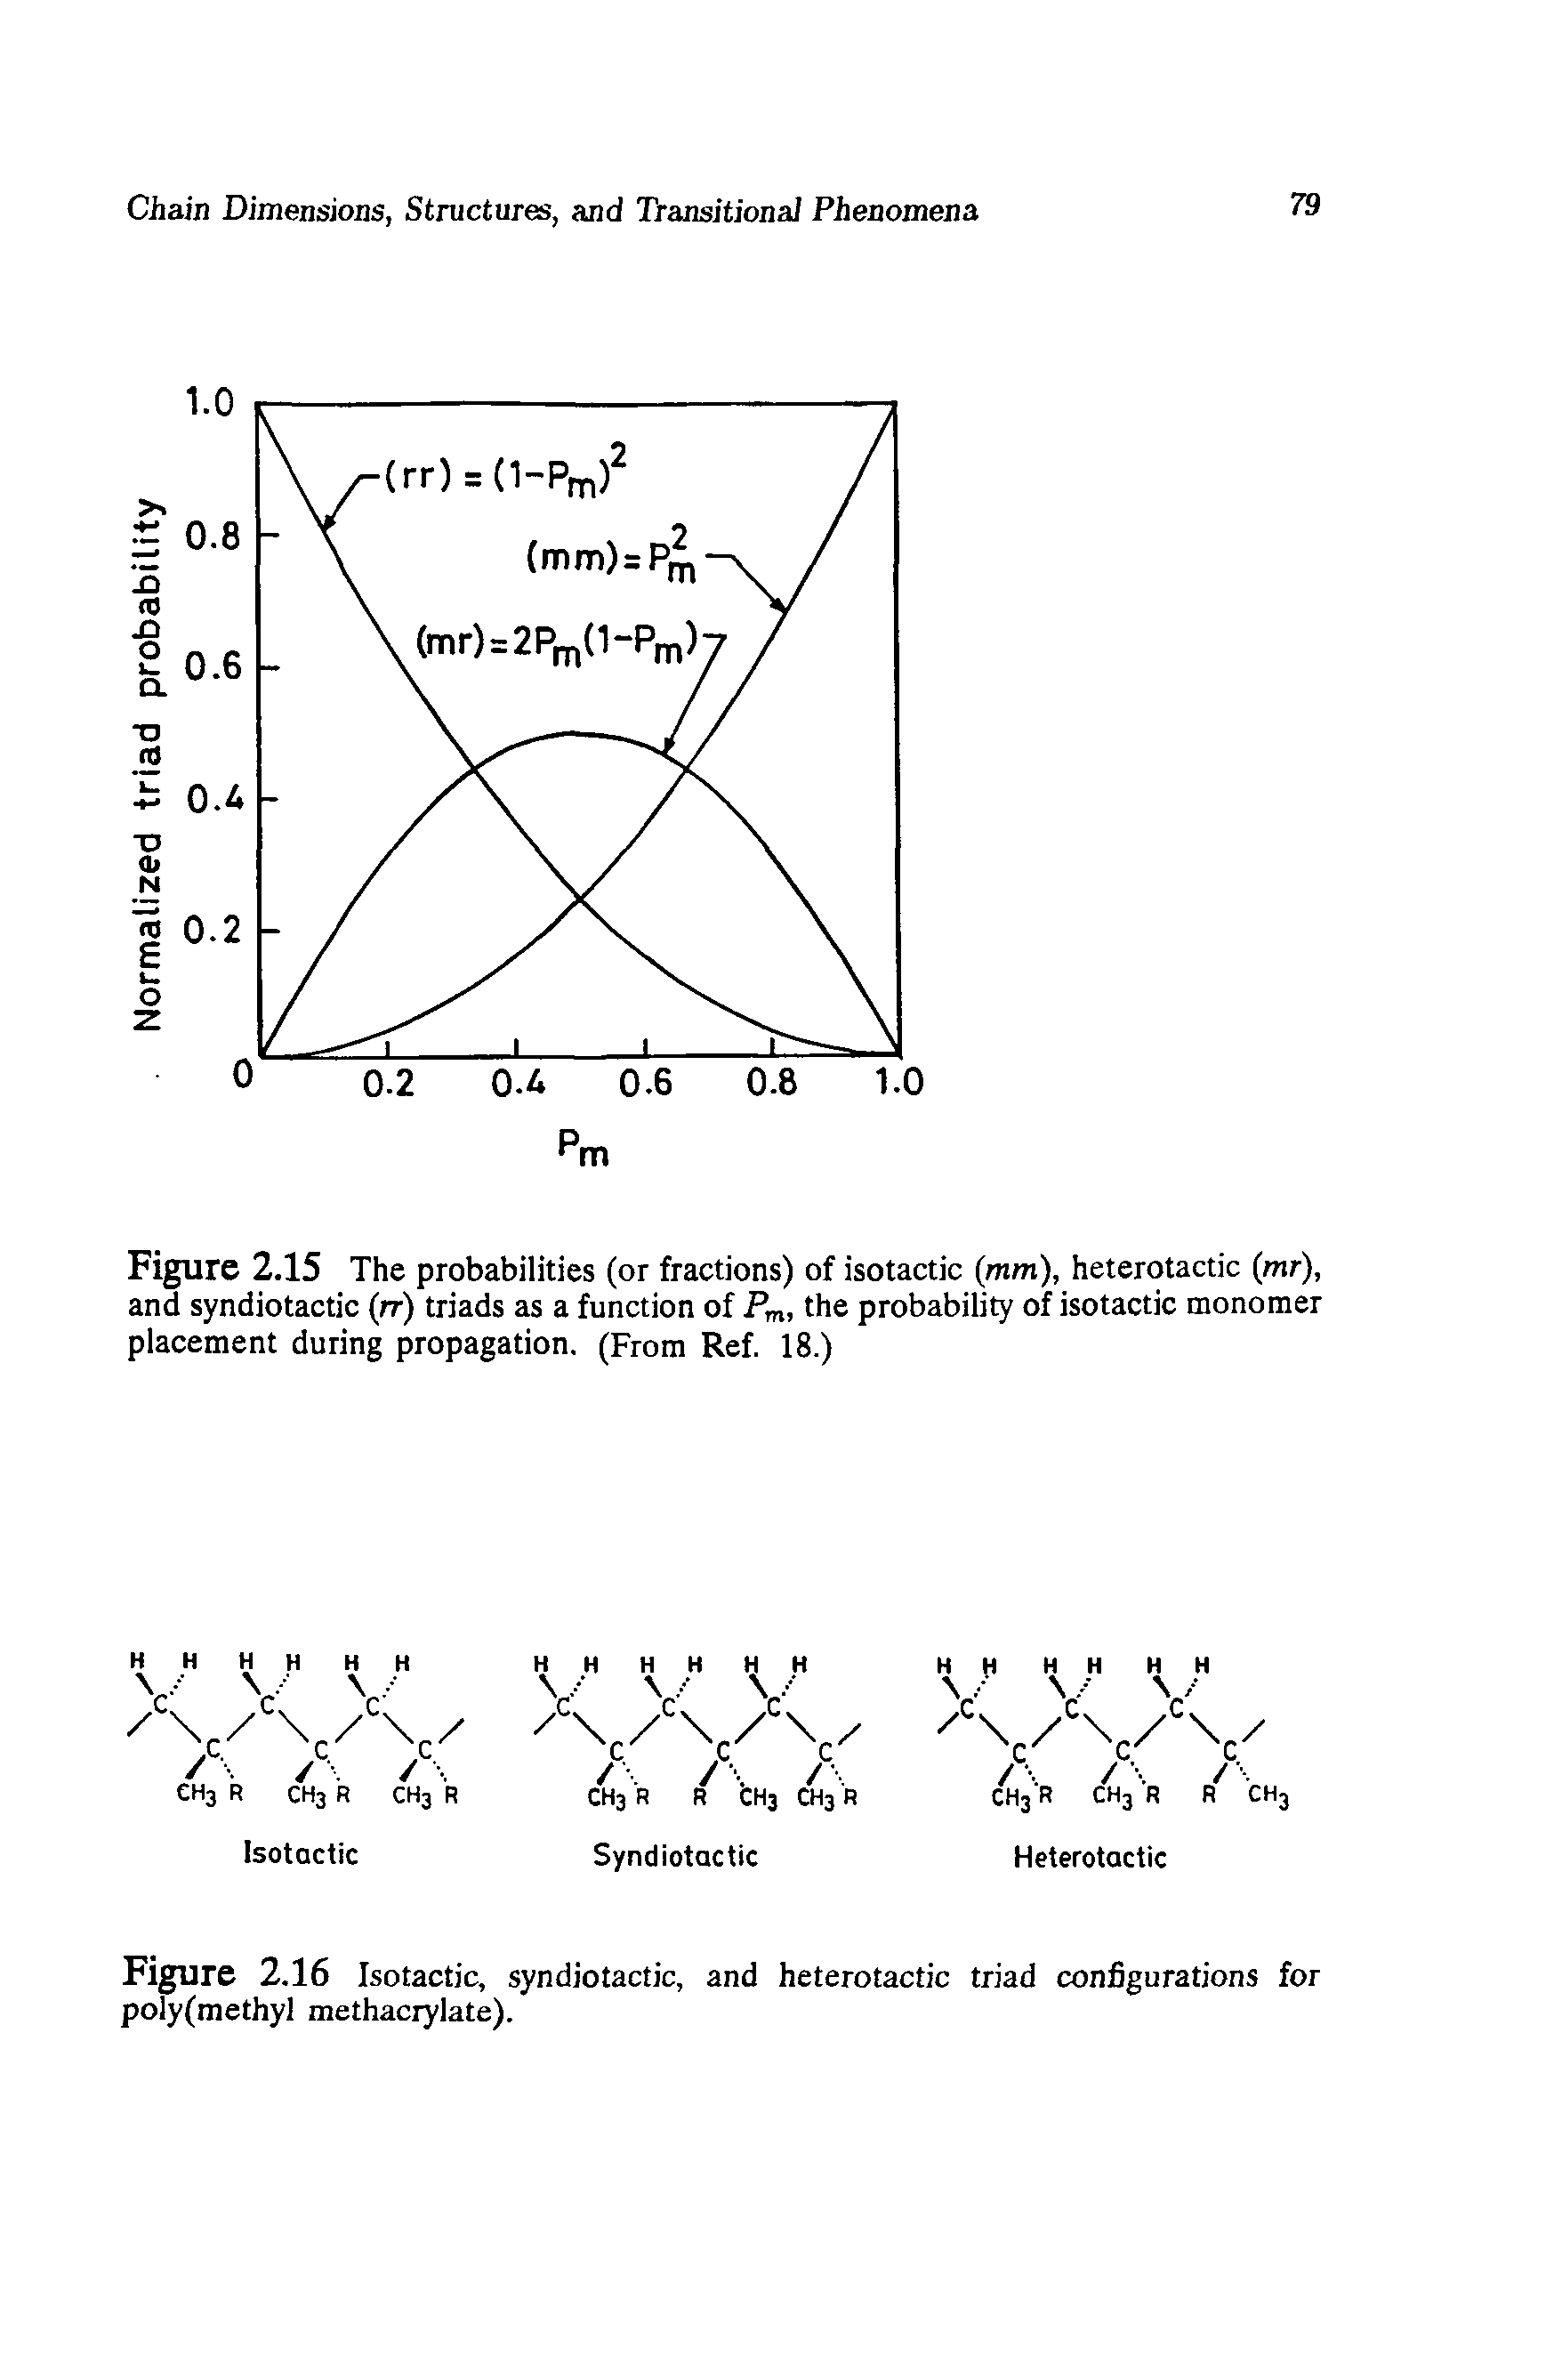 Figure 2.15 The probabilities (or fractions) of isotactic (mm), heterotactic (mr), and syndiotactic (rr) triads as a function of Pm, the probability of isotactic monomer placement during propagation. (From Ref. 18.)...